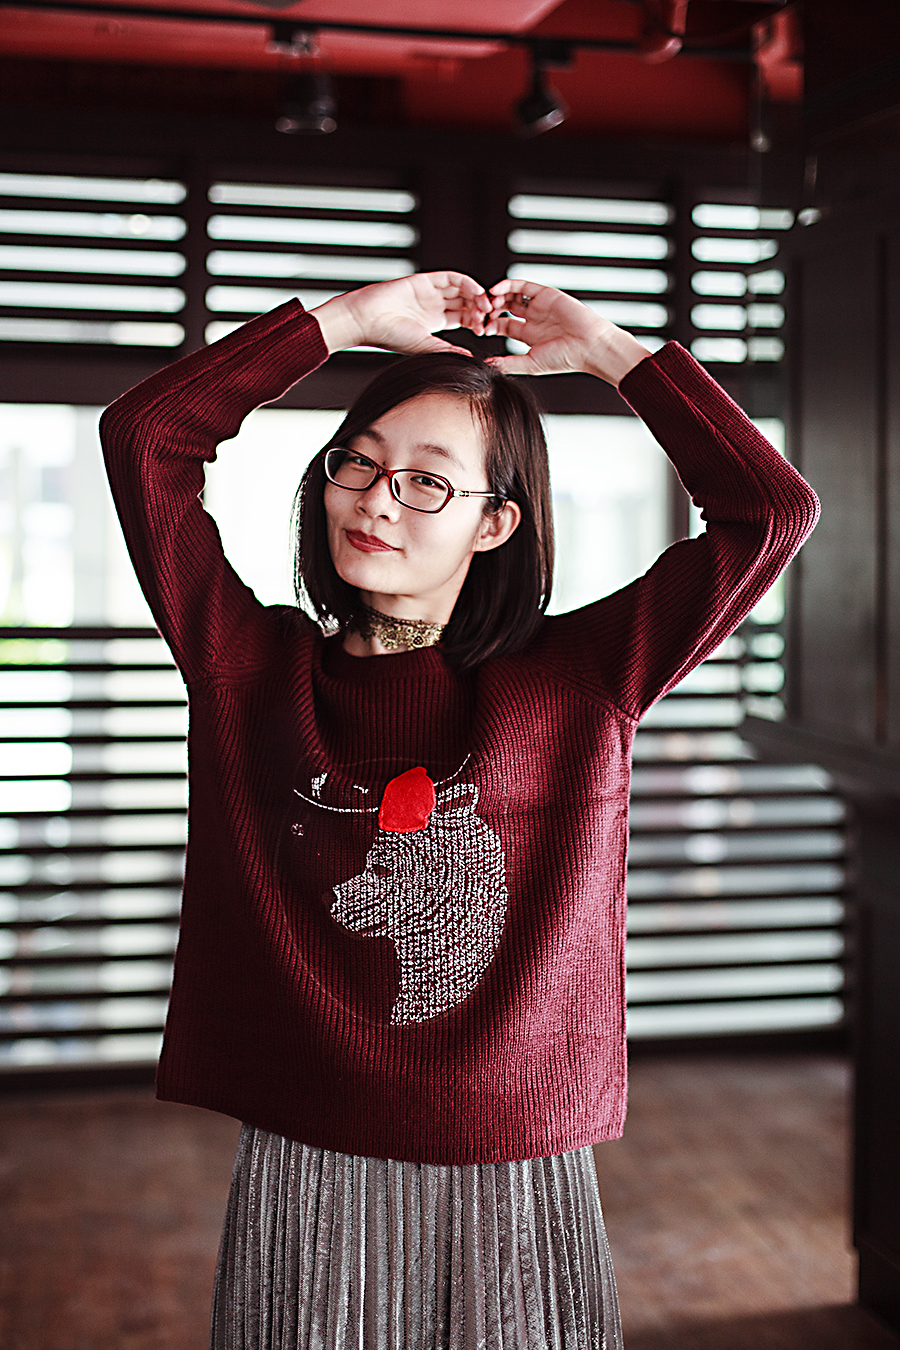 Making a heart shape with my arms in my bear sweater.